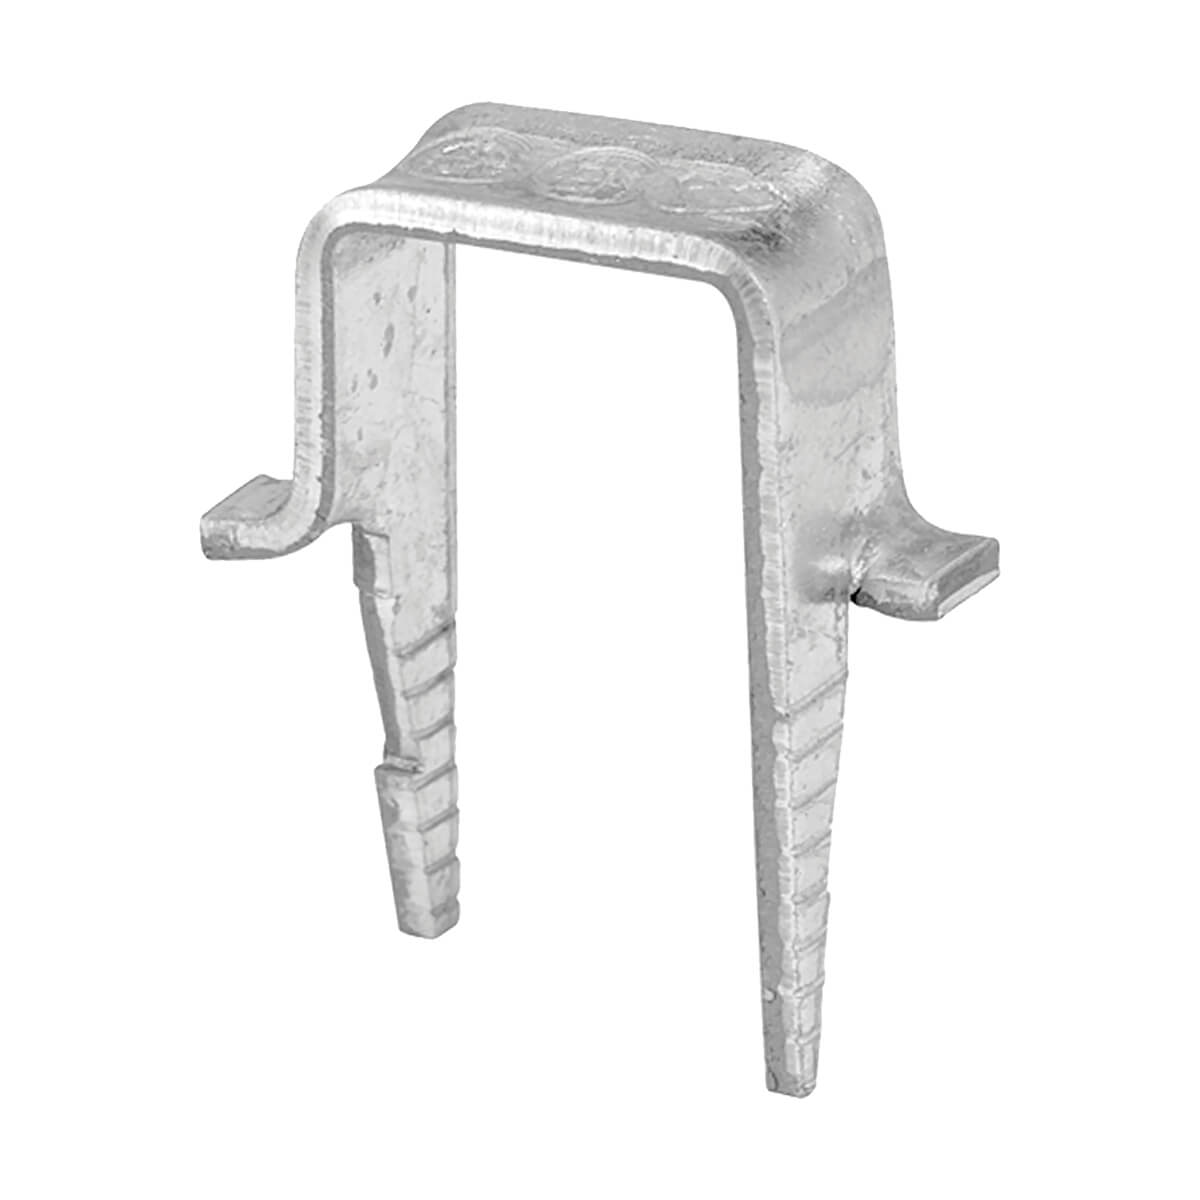 Cable Staples - Galvanized Steel - 20 Pack